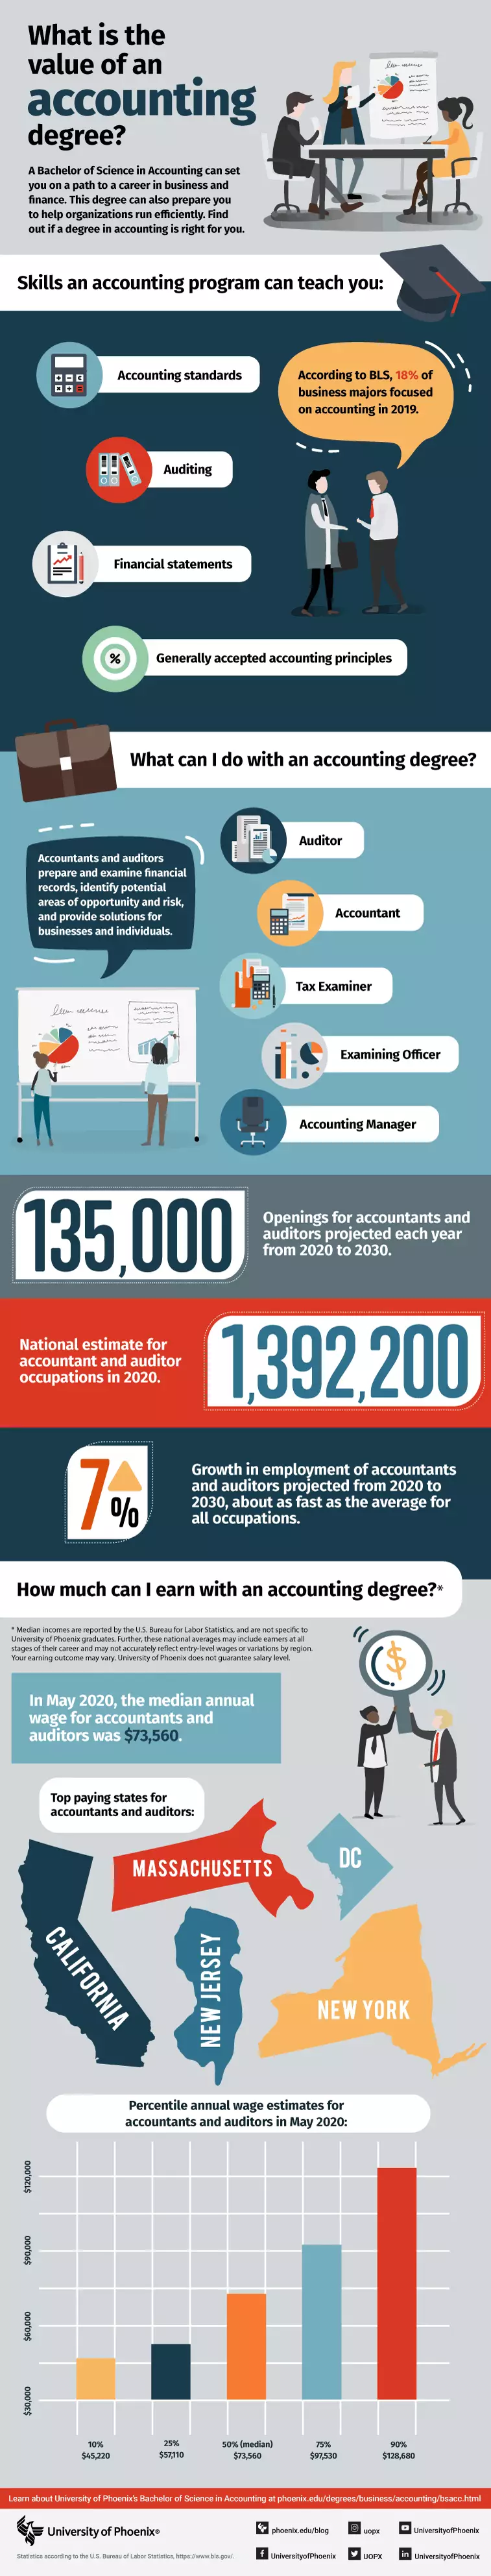 What is the value of an accounting degree - an infographic